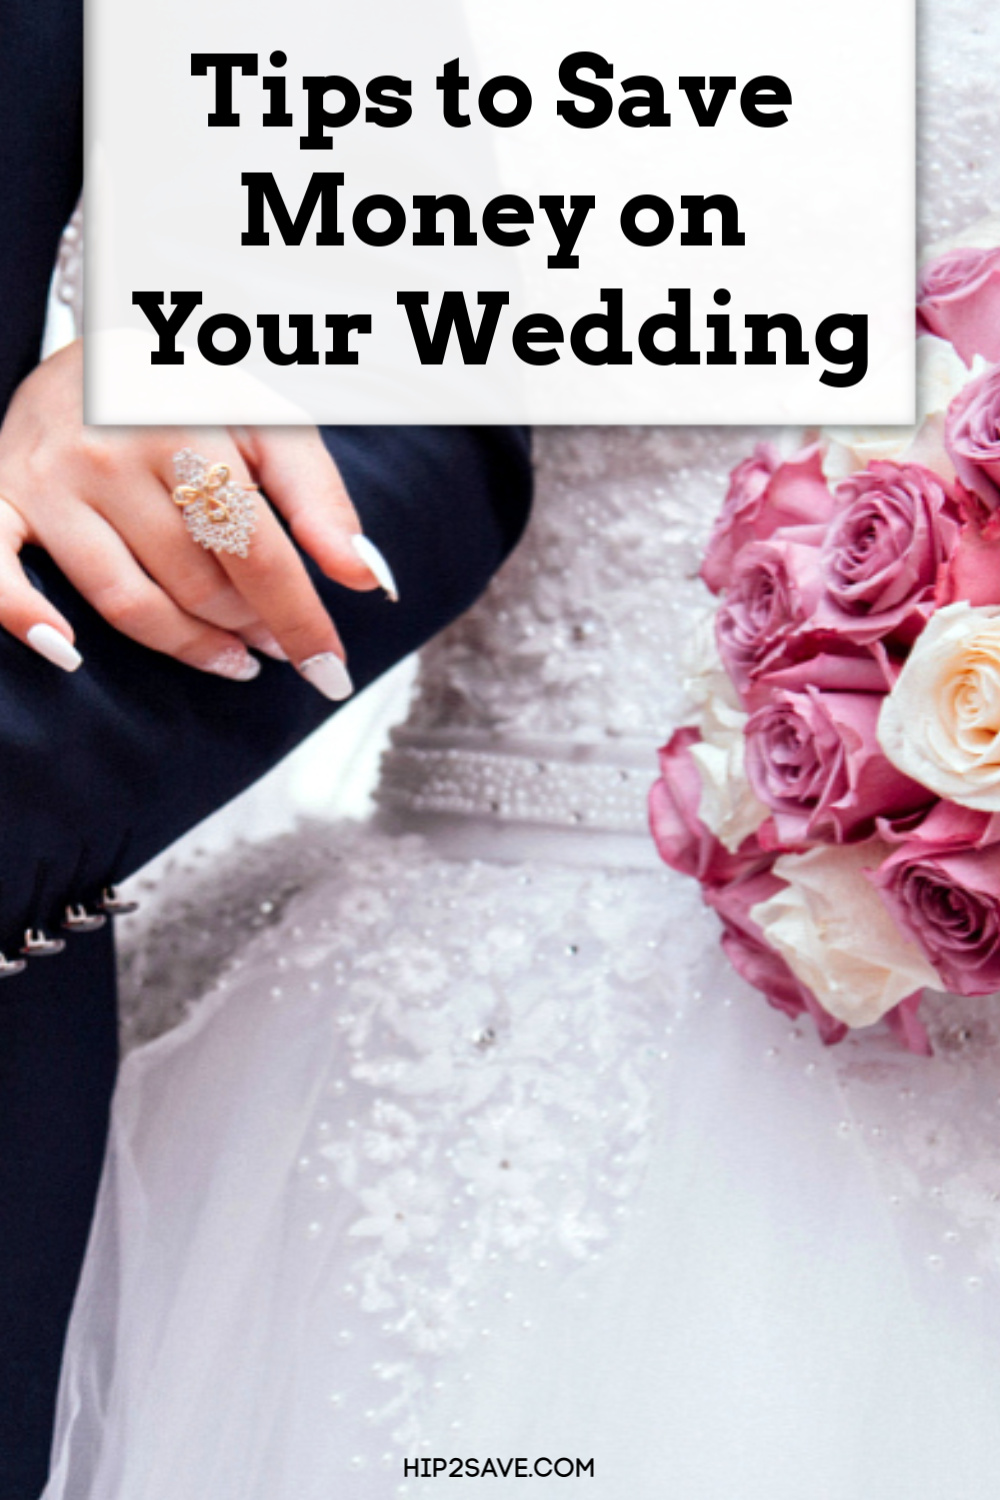 How to Save on Your Wedding | Cheap Wedding Ideas, Dresses, & More